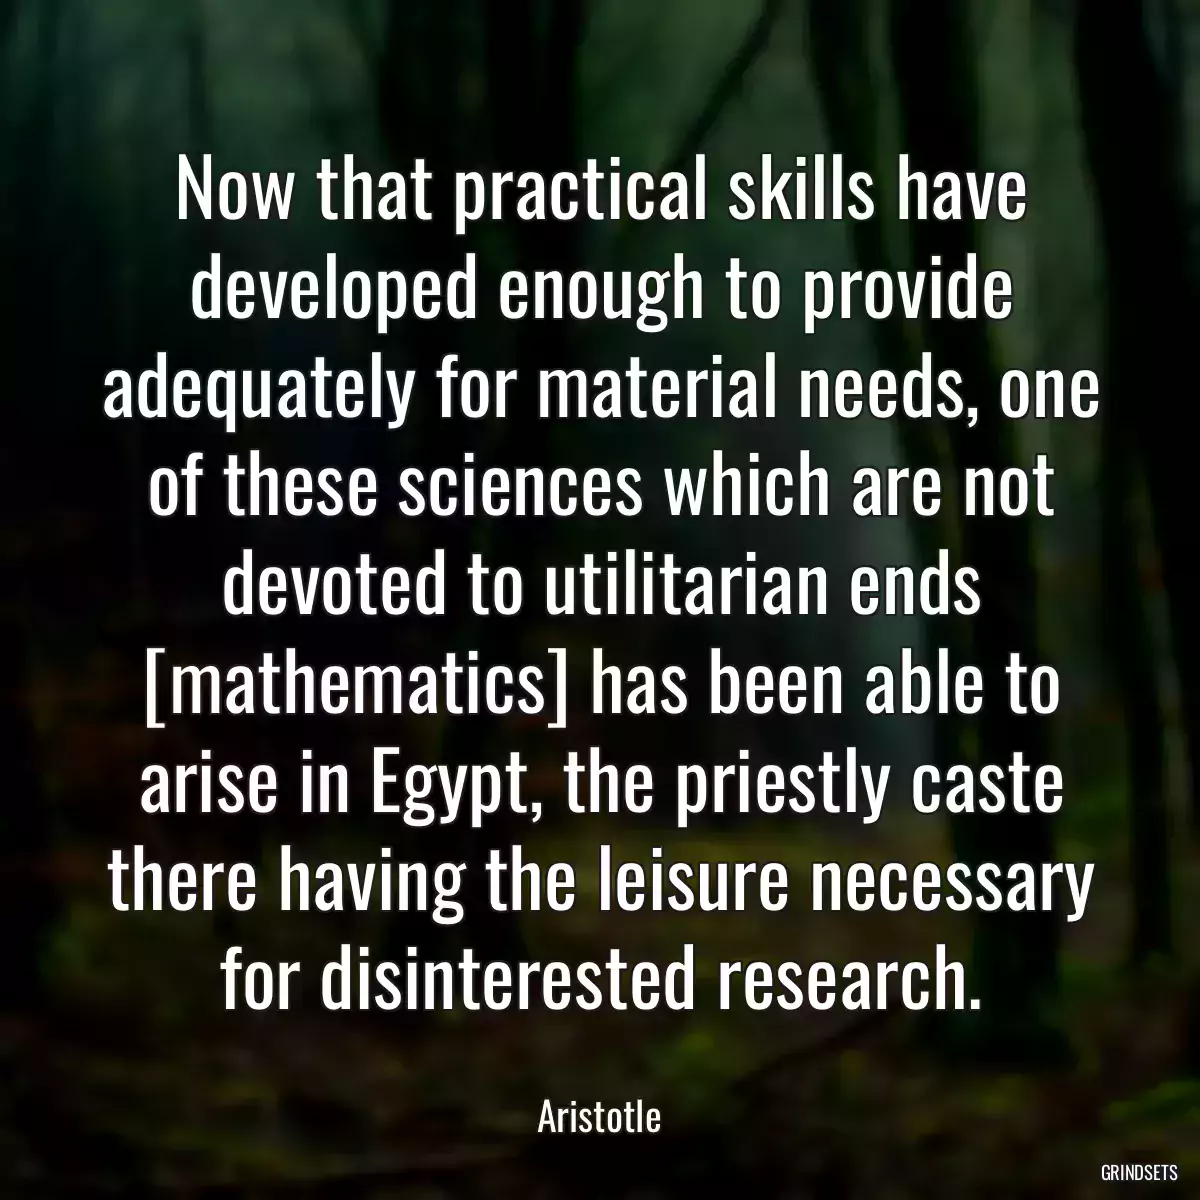 Now that practical skills have developed enough to provide adequately for material needs, one of these sciences which are not devoted to utilitarian ends [mathematics] has been able to arise in Egypt, the priestly caste there having the leisure necessary for disinterested research.